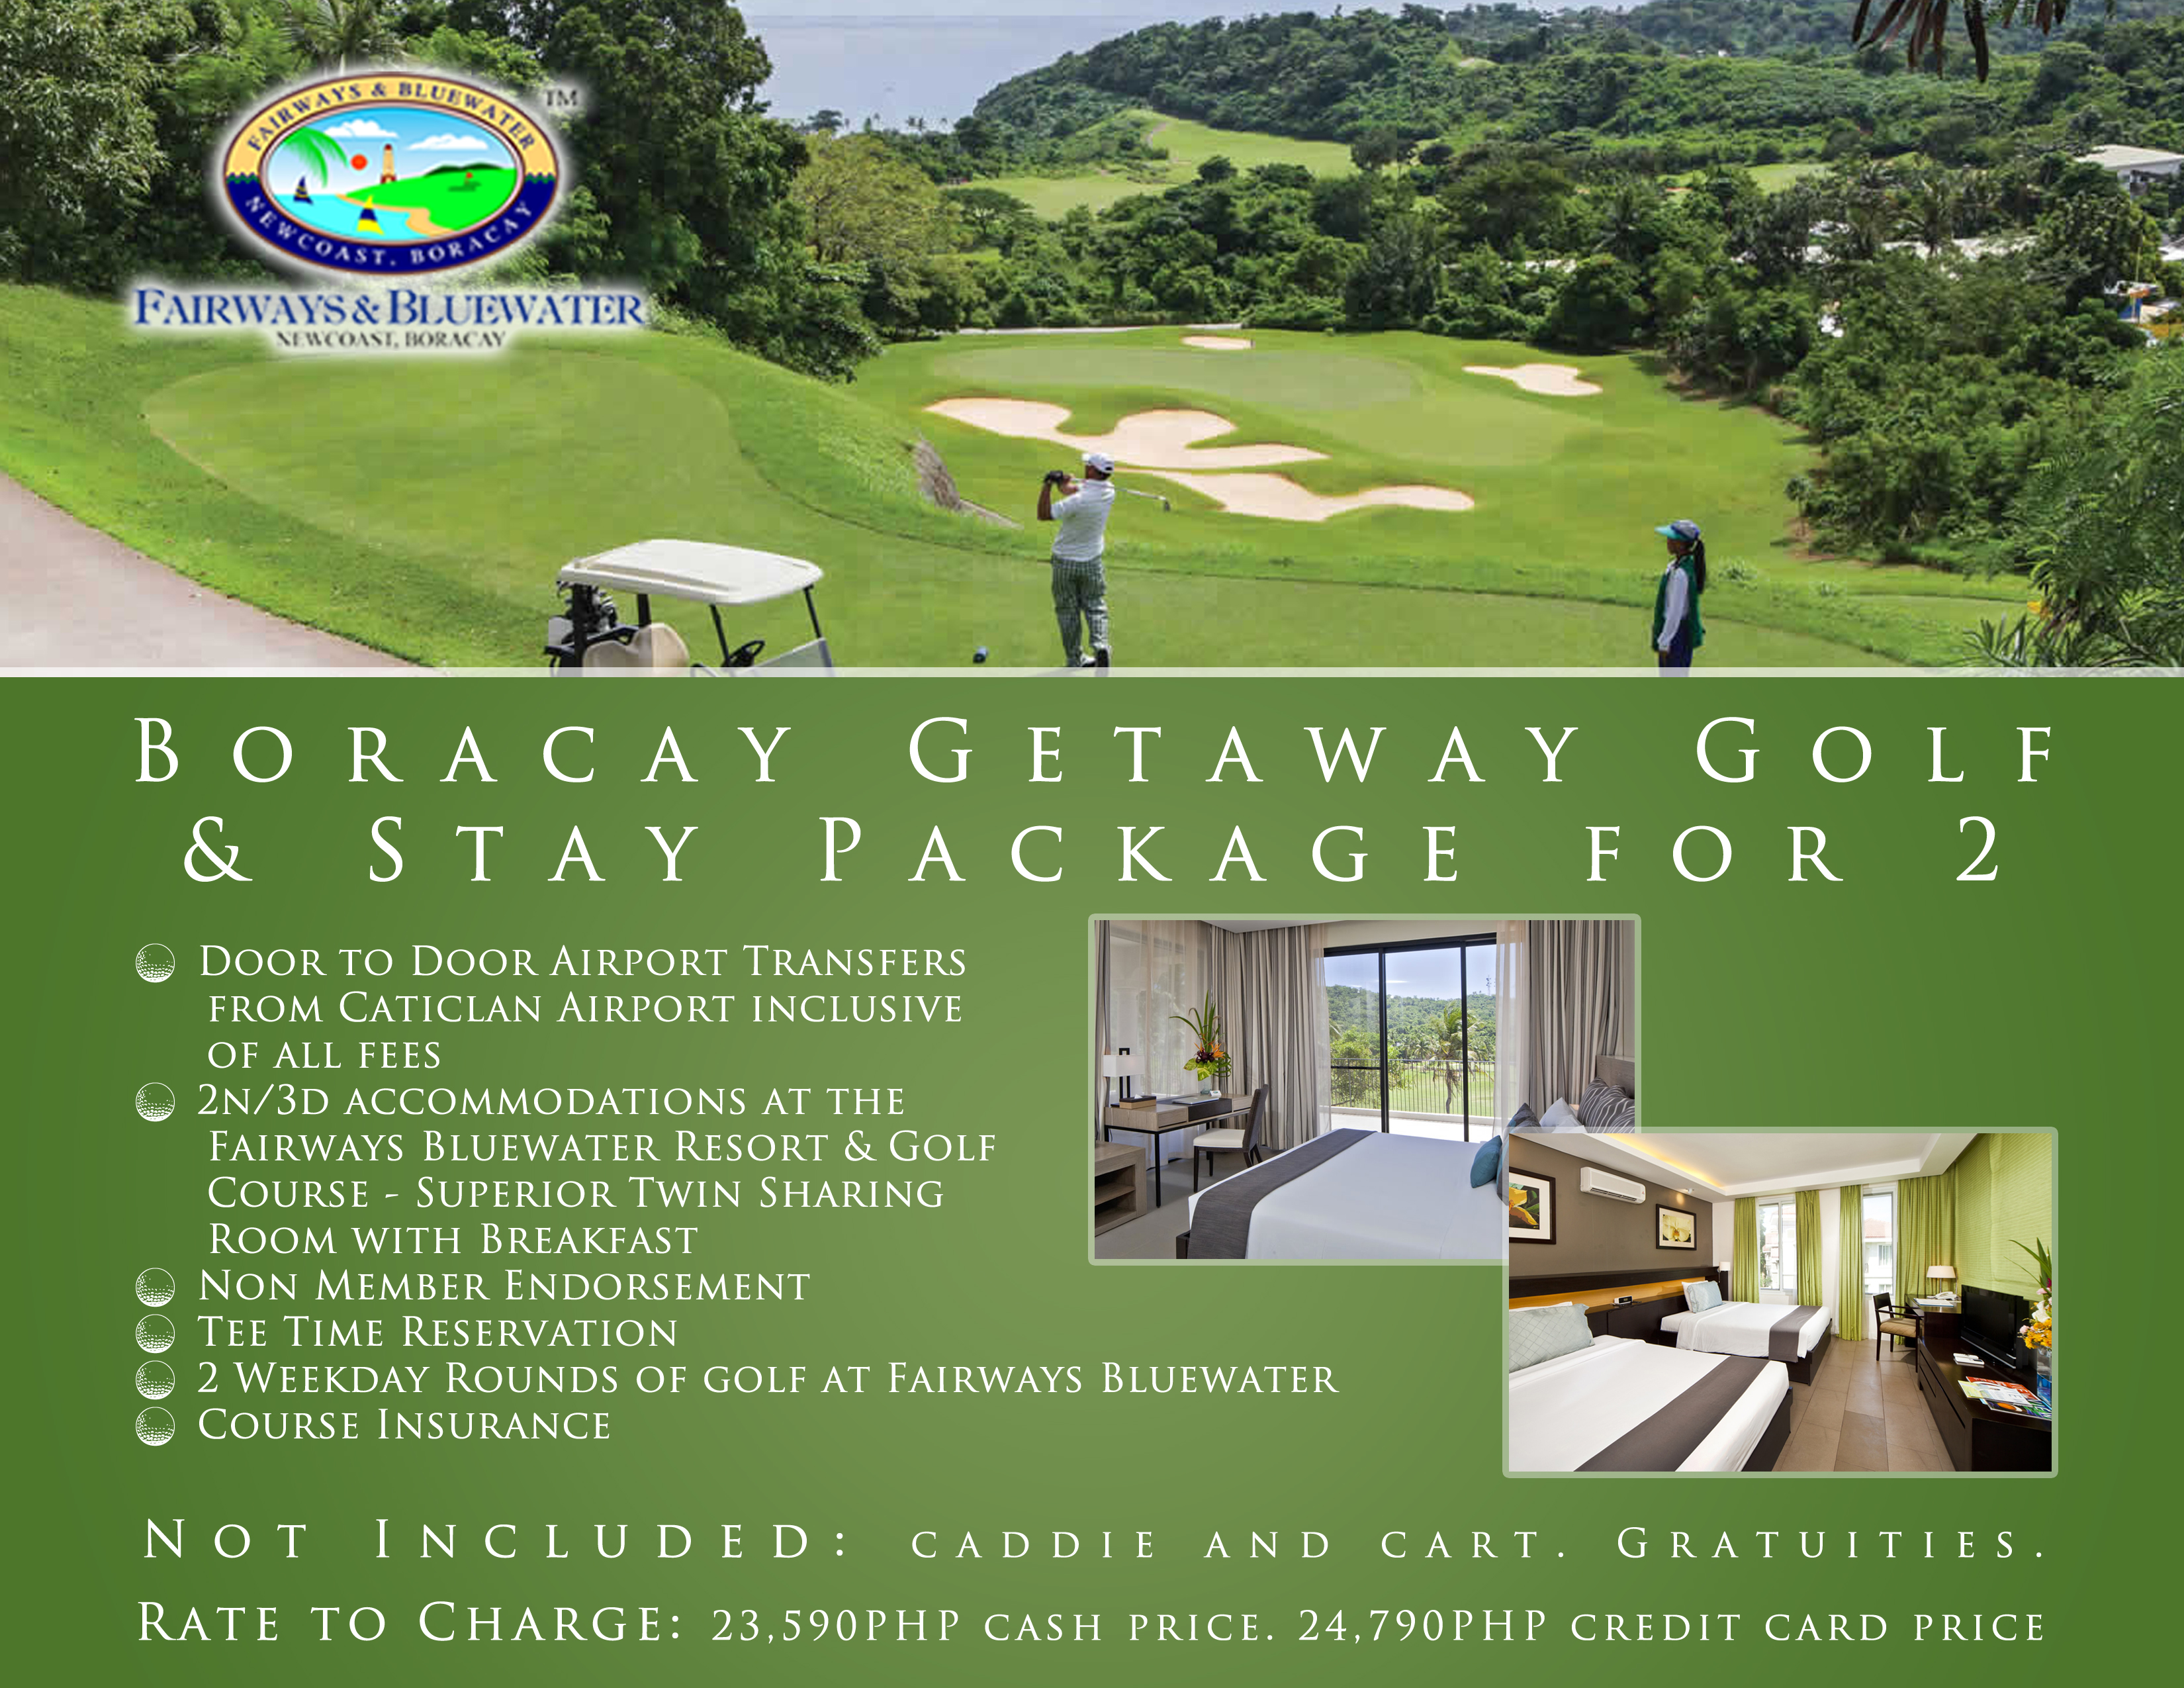 Offer #3 - Boracay Getaway Golf & Stay Package for 2